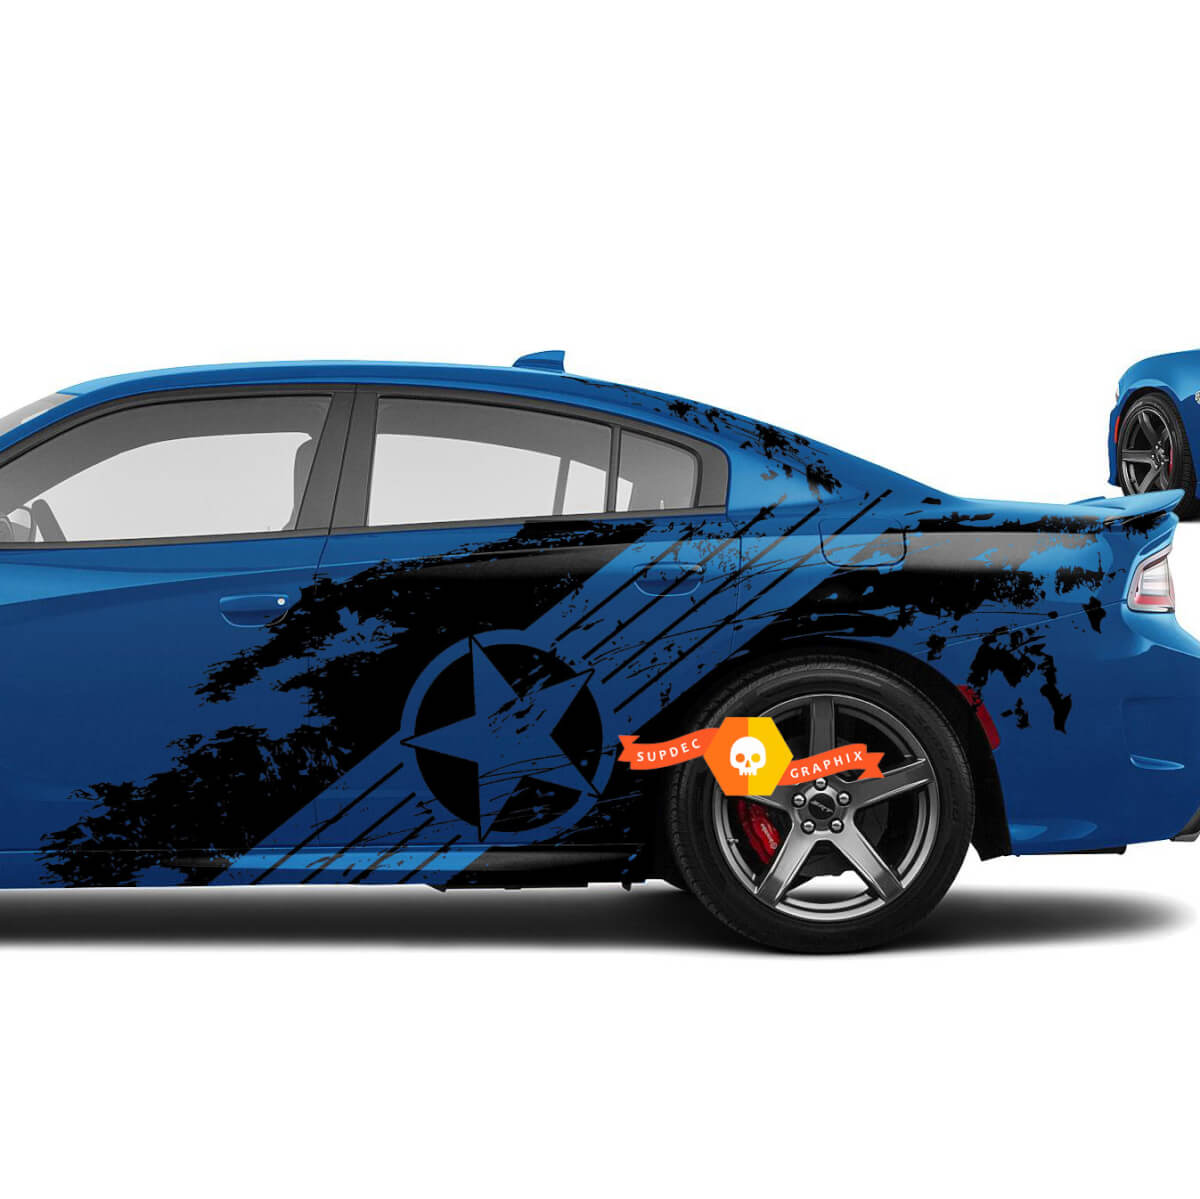 New Dodge Challenger or Charger Hellcat hell cat Military Star style Splash Grunge Stripes Kit Vinyl Decal Graphic